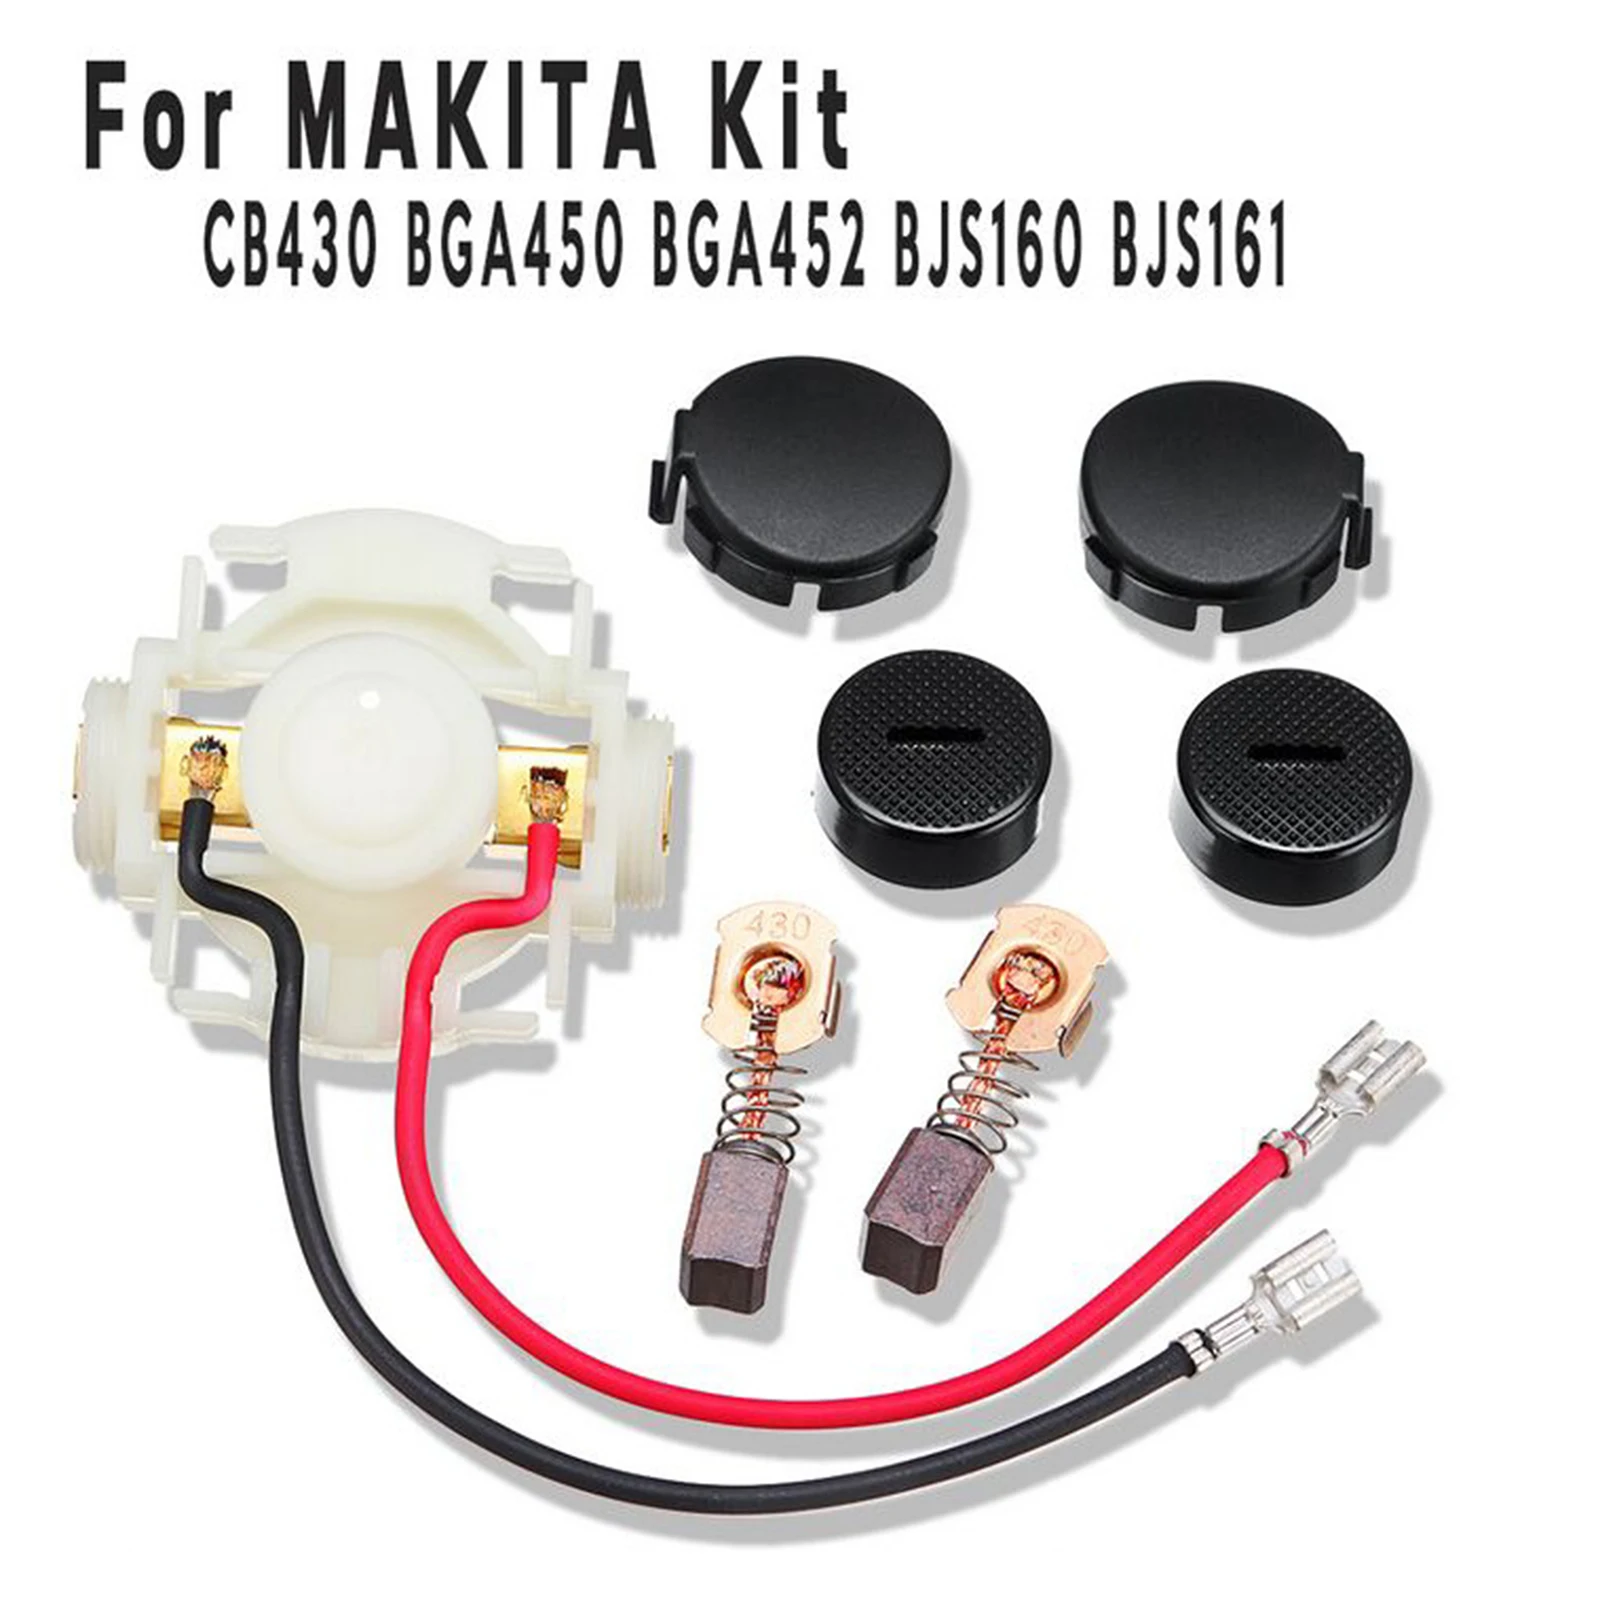 Carbon Brush Holder Kit Replacement suitable fits for M-a-kita 638921-2 CB430 BGA450 High Performance